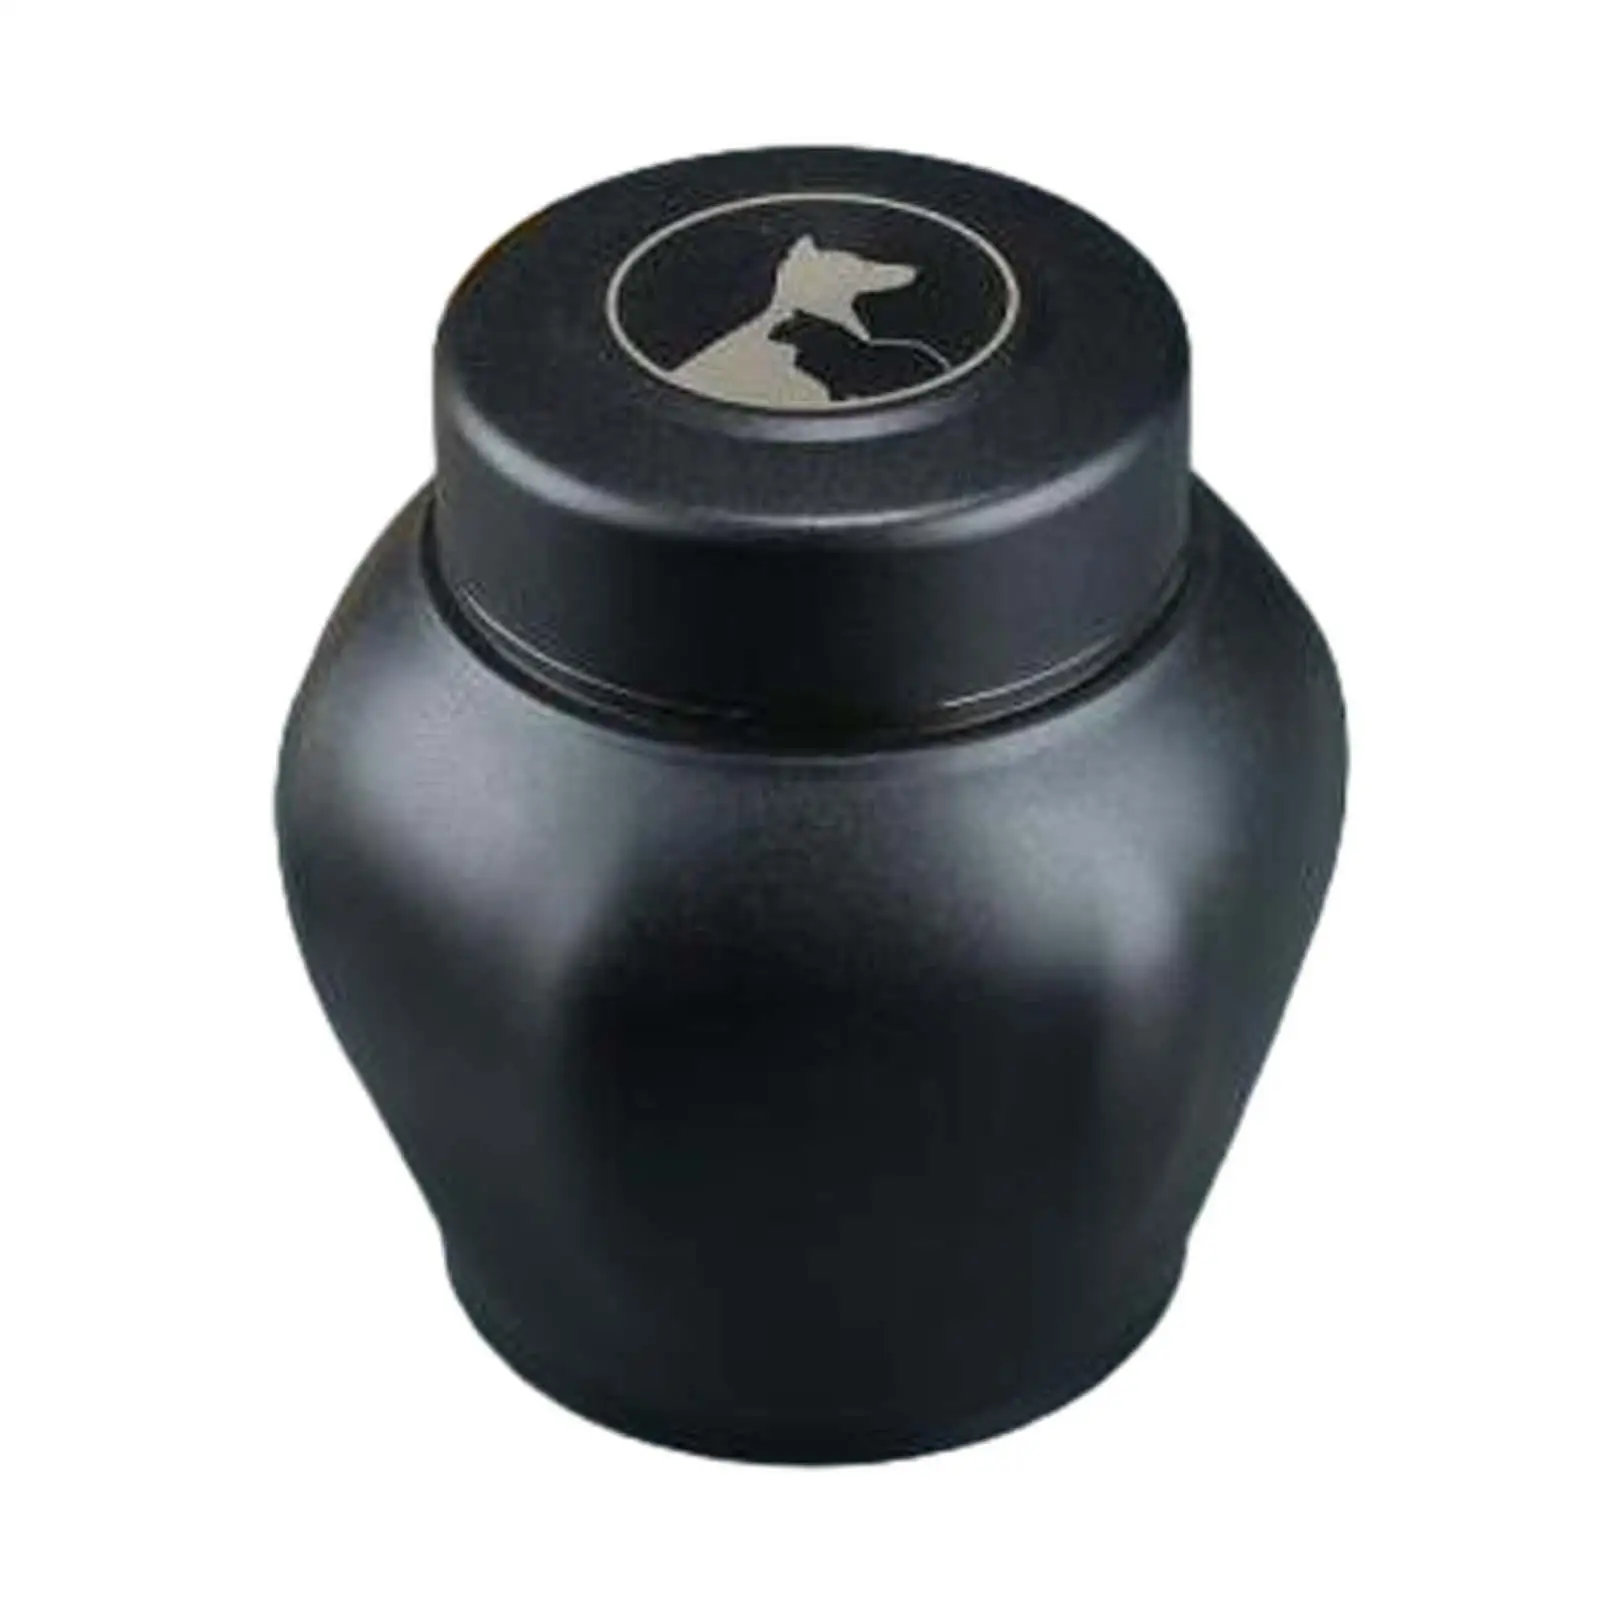 Small Cremation Urn Stainless Steel Storage Container Durable Cat Ash Holder Pet Ash Urn Keepsake Urn for Rabbit Dogs Cats